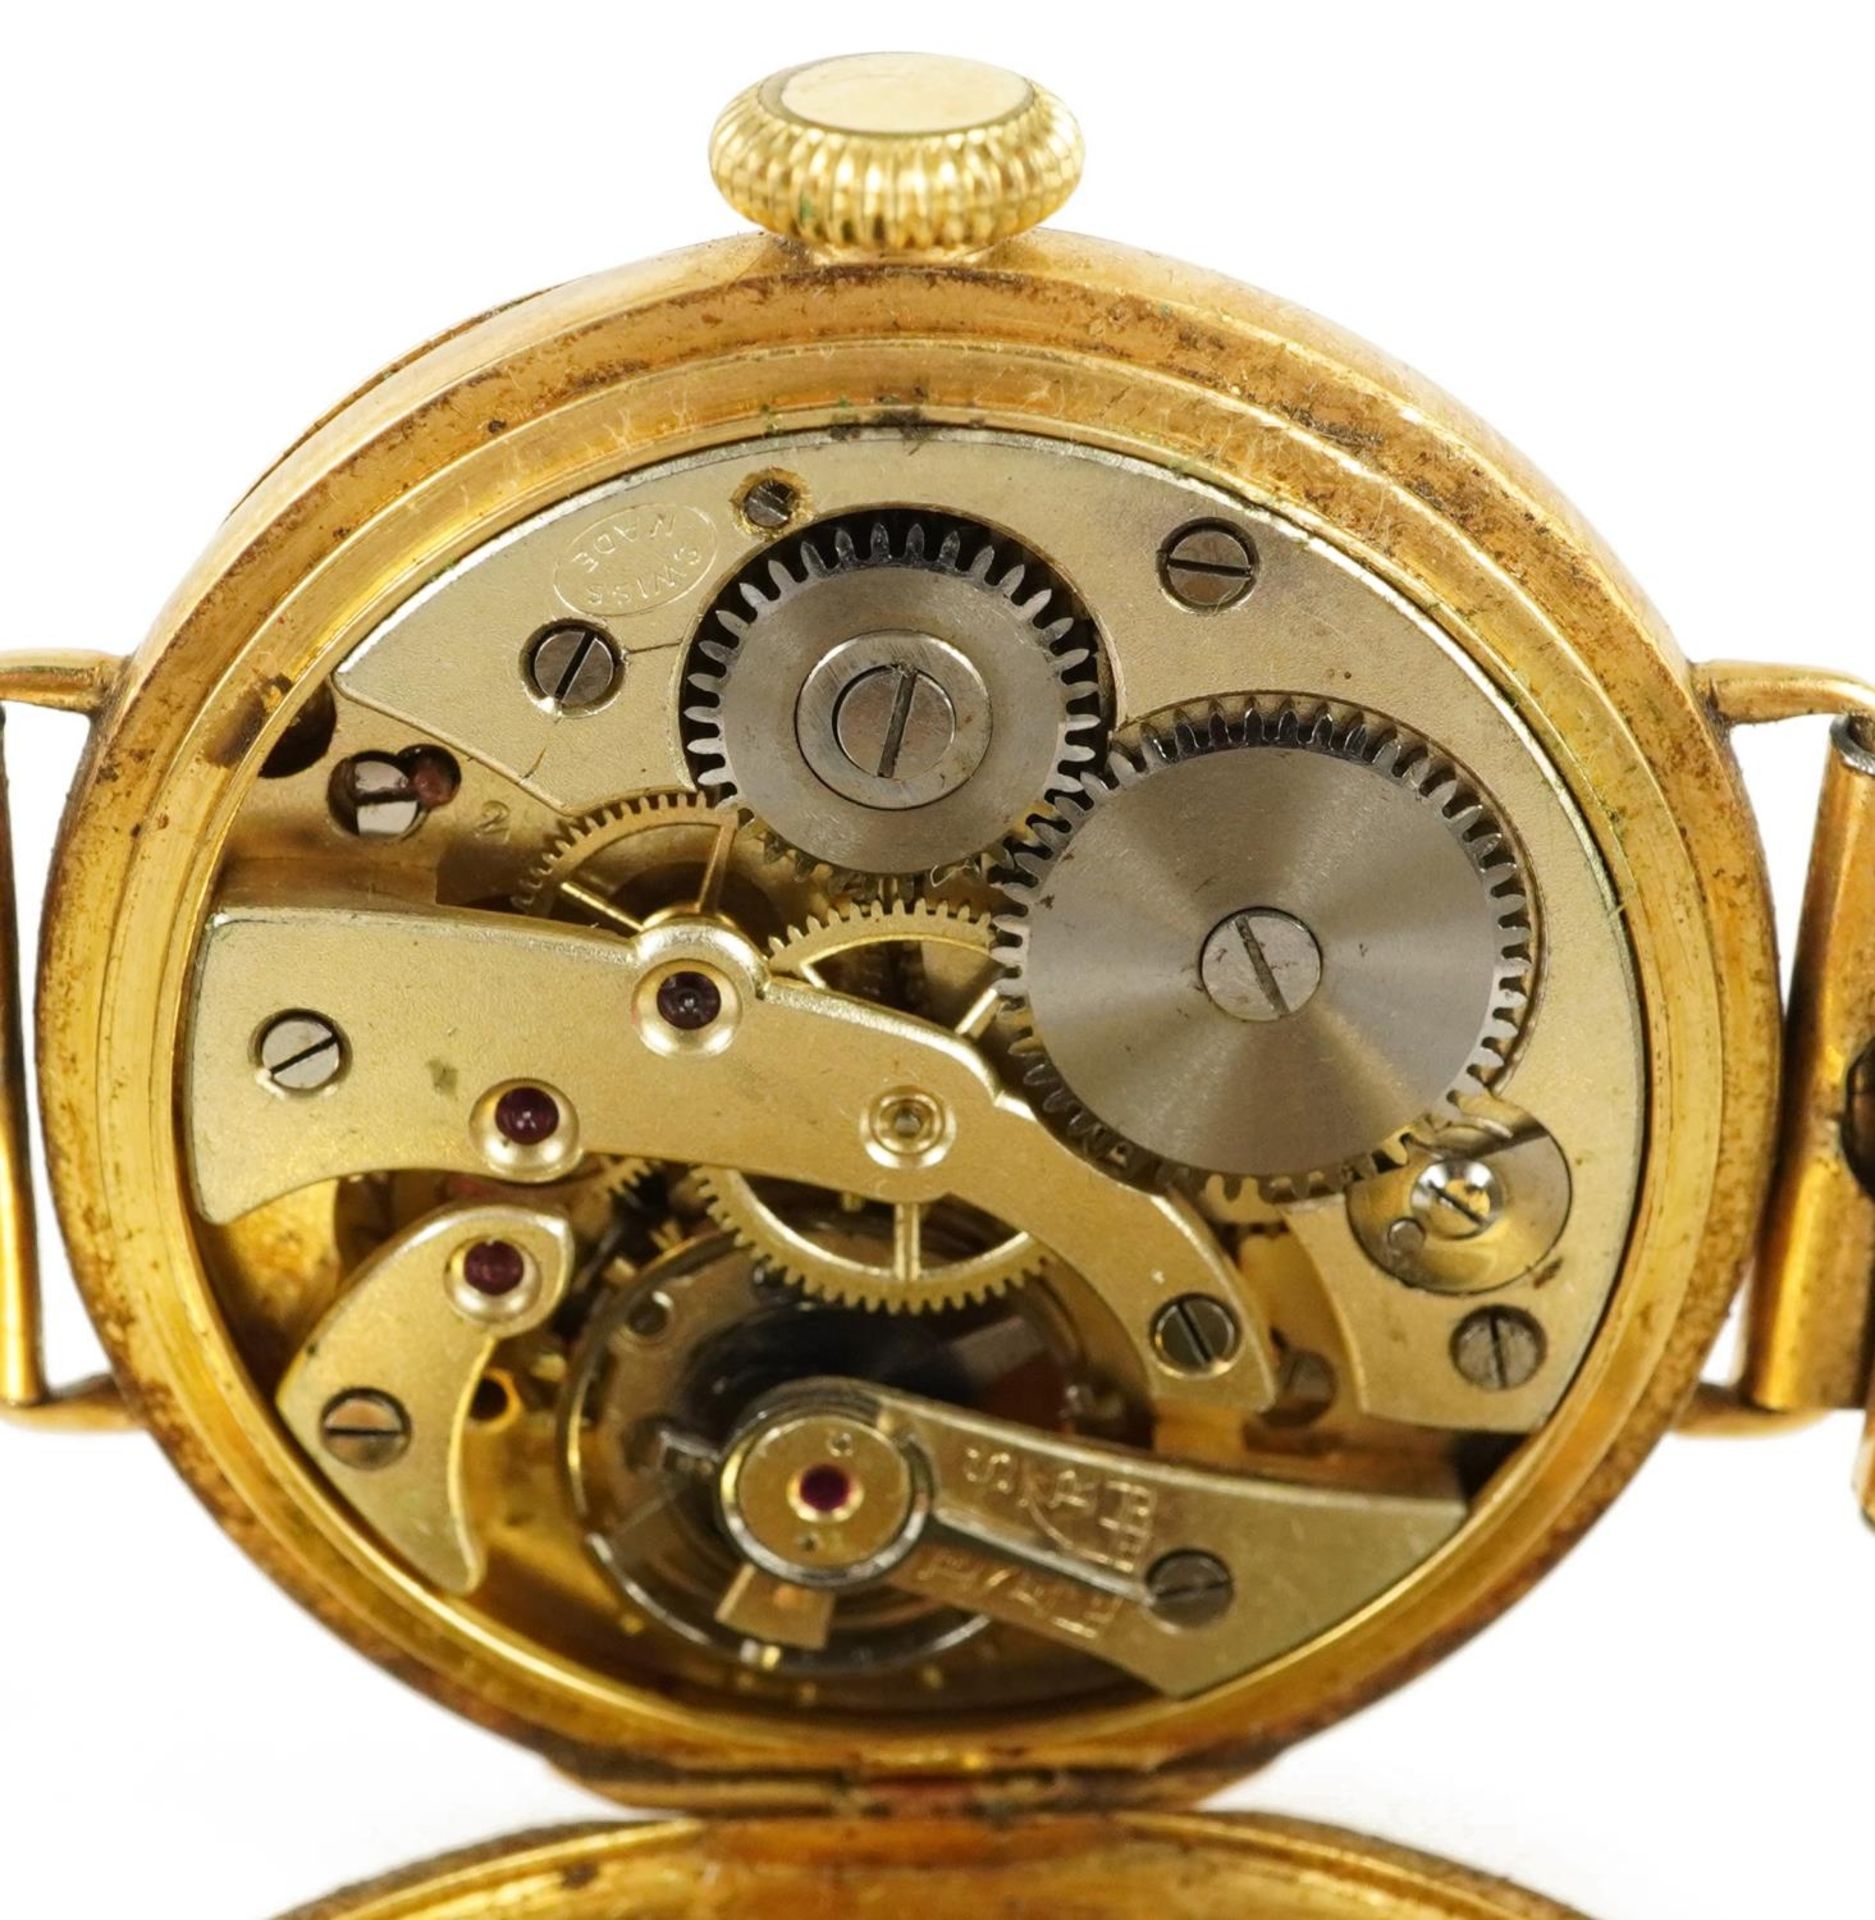 18ct gold gentlemen's manual trench type wristwatch with subsidiary dial retailed by Hicklenton, - Image 4 of 6